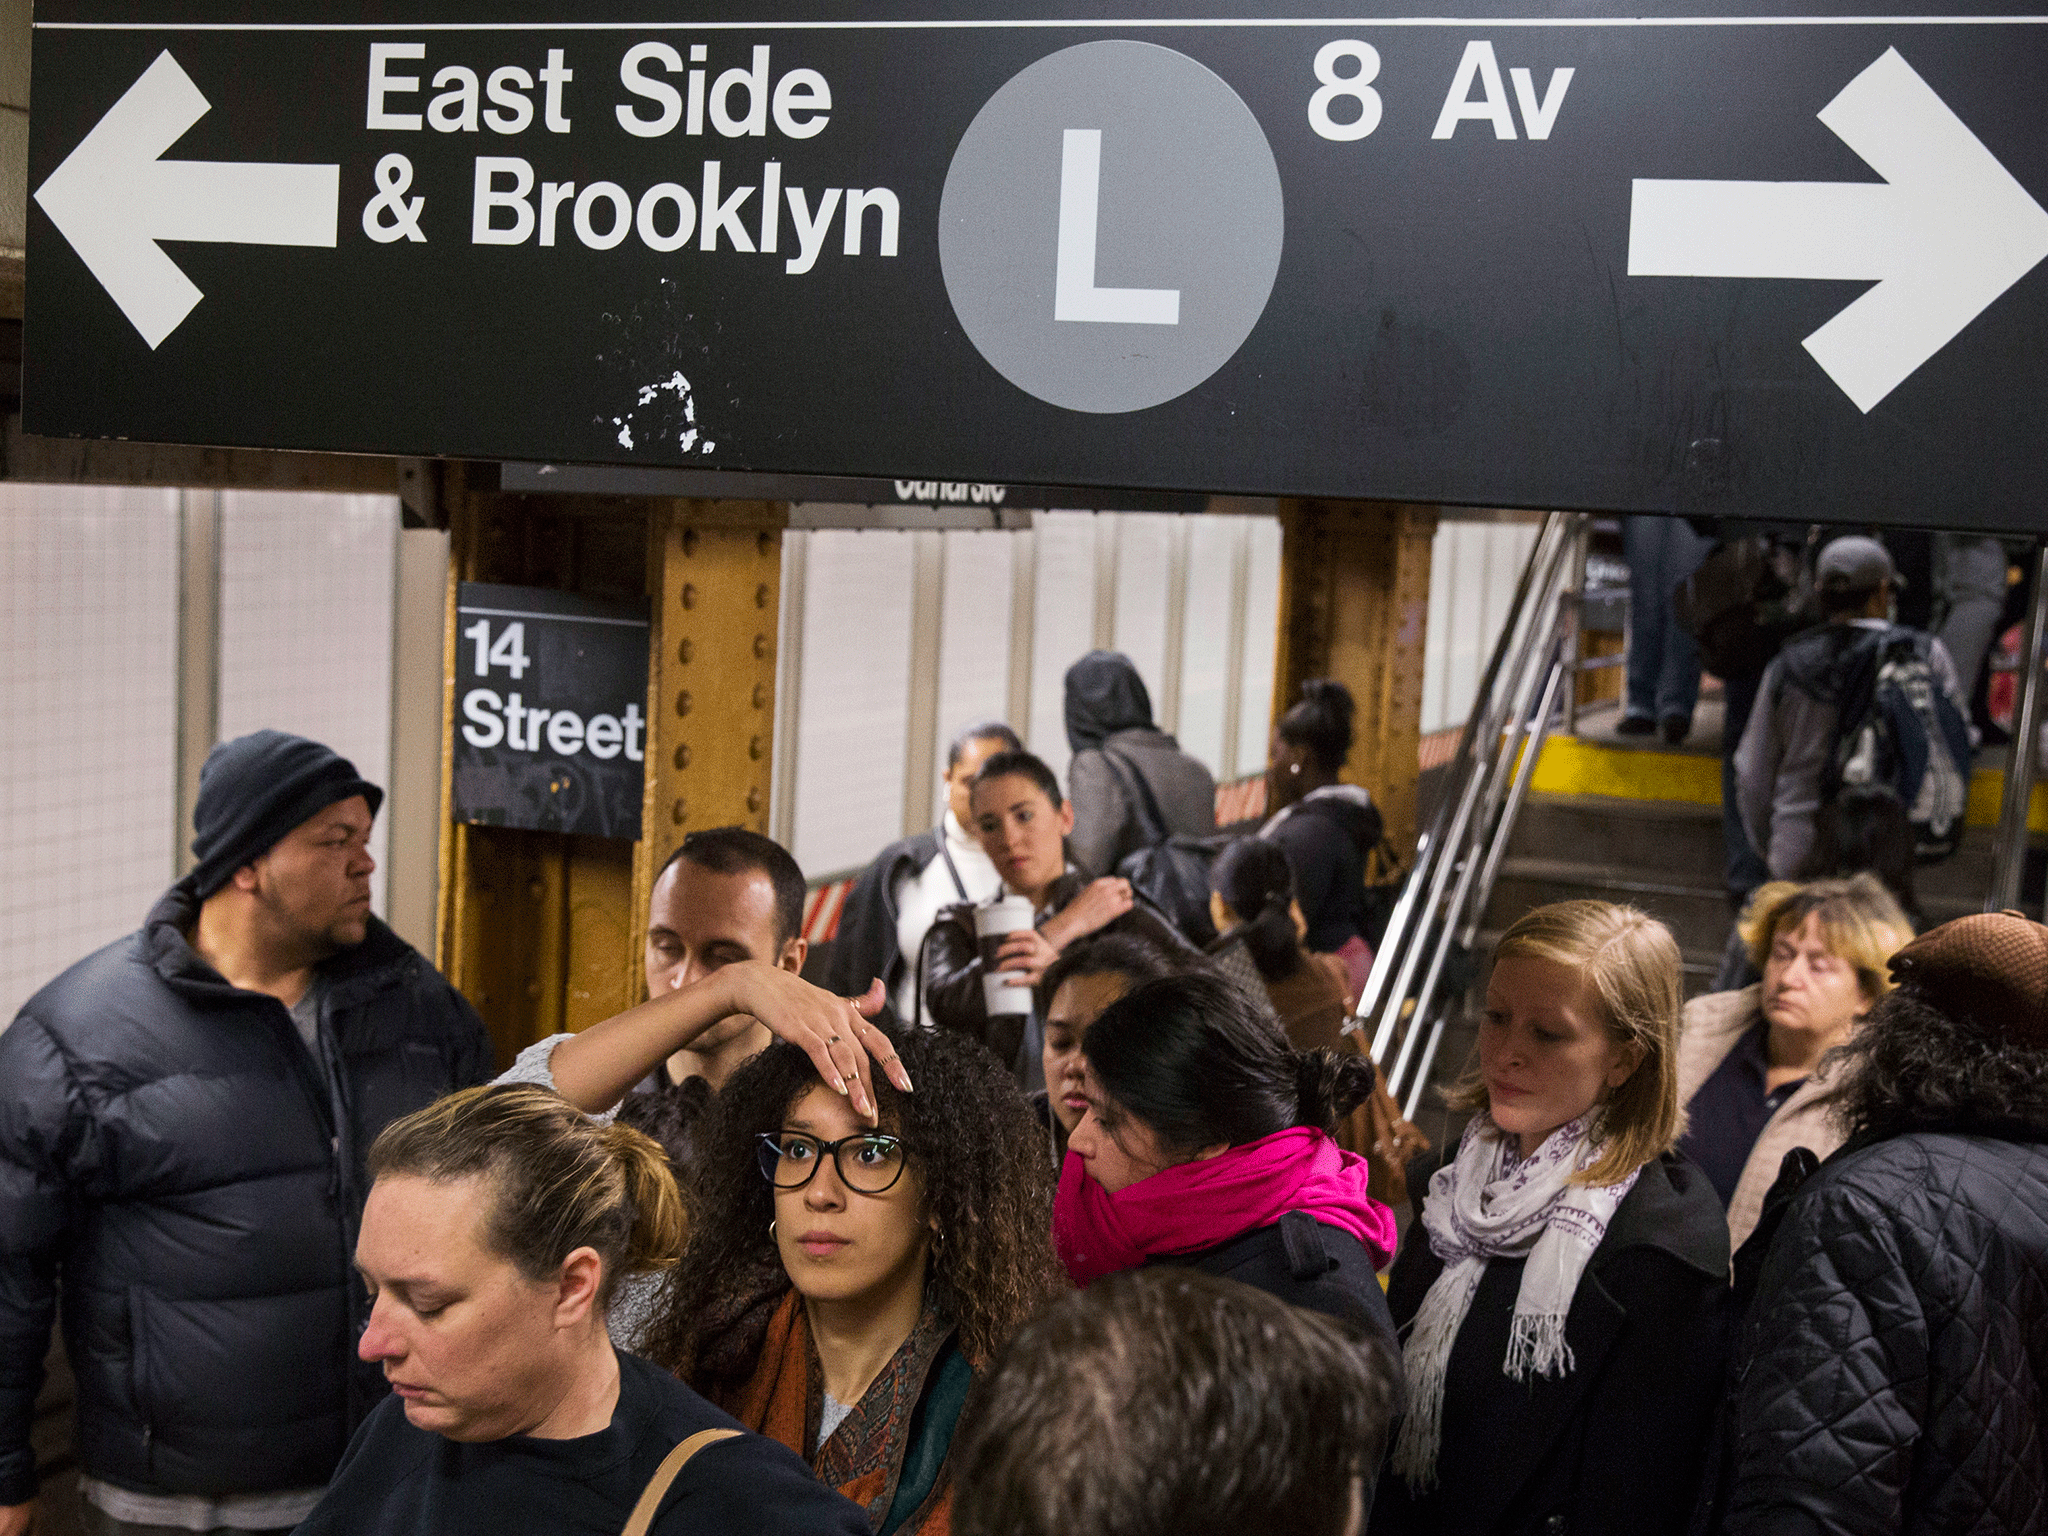 The New York metro is getting increasingly crowded